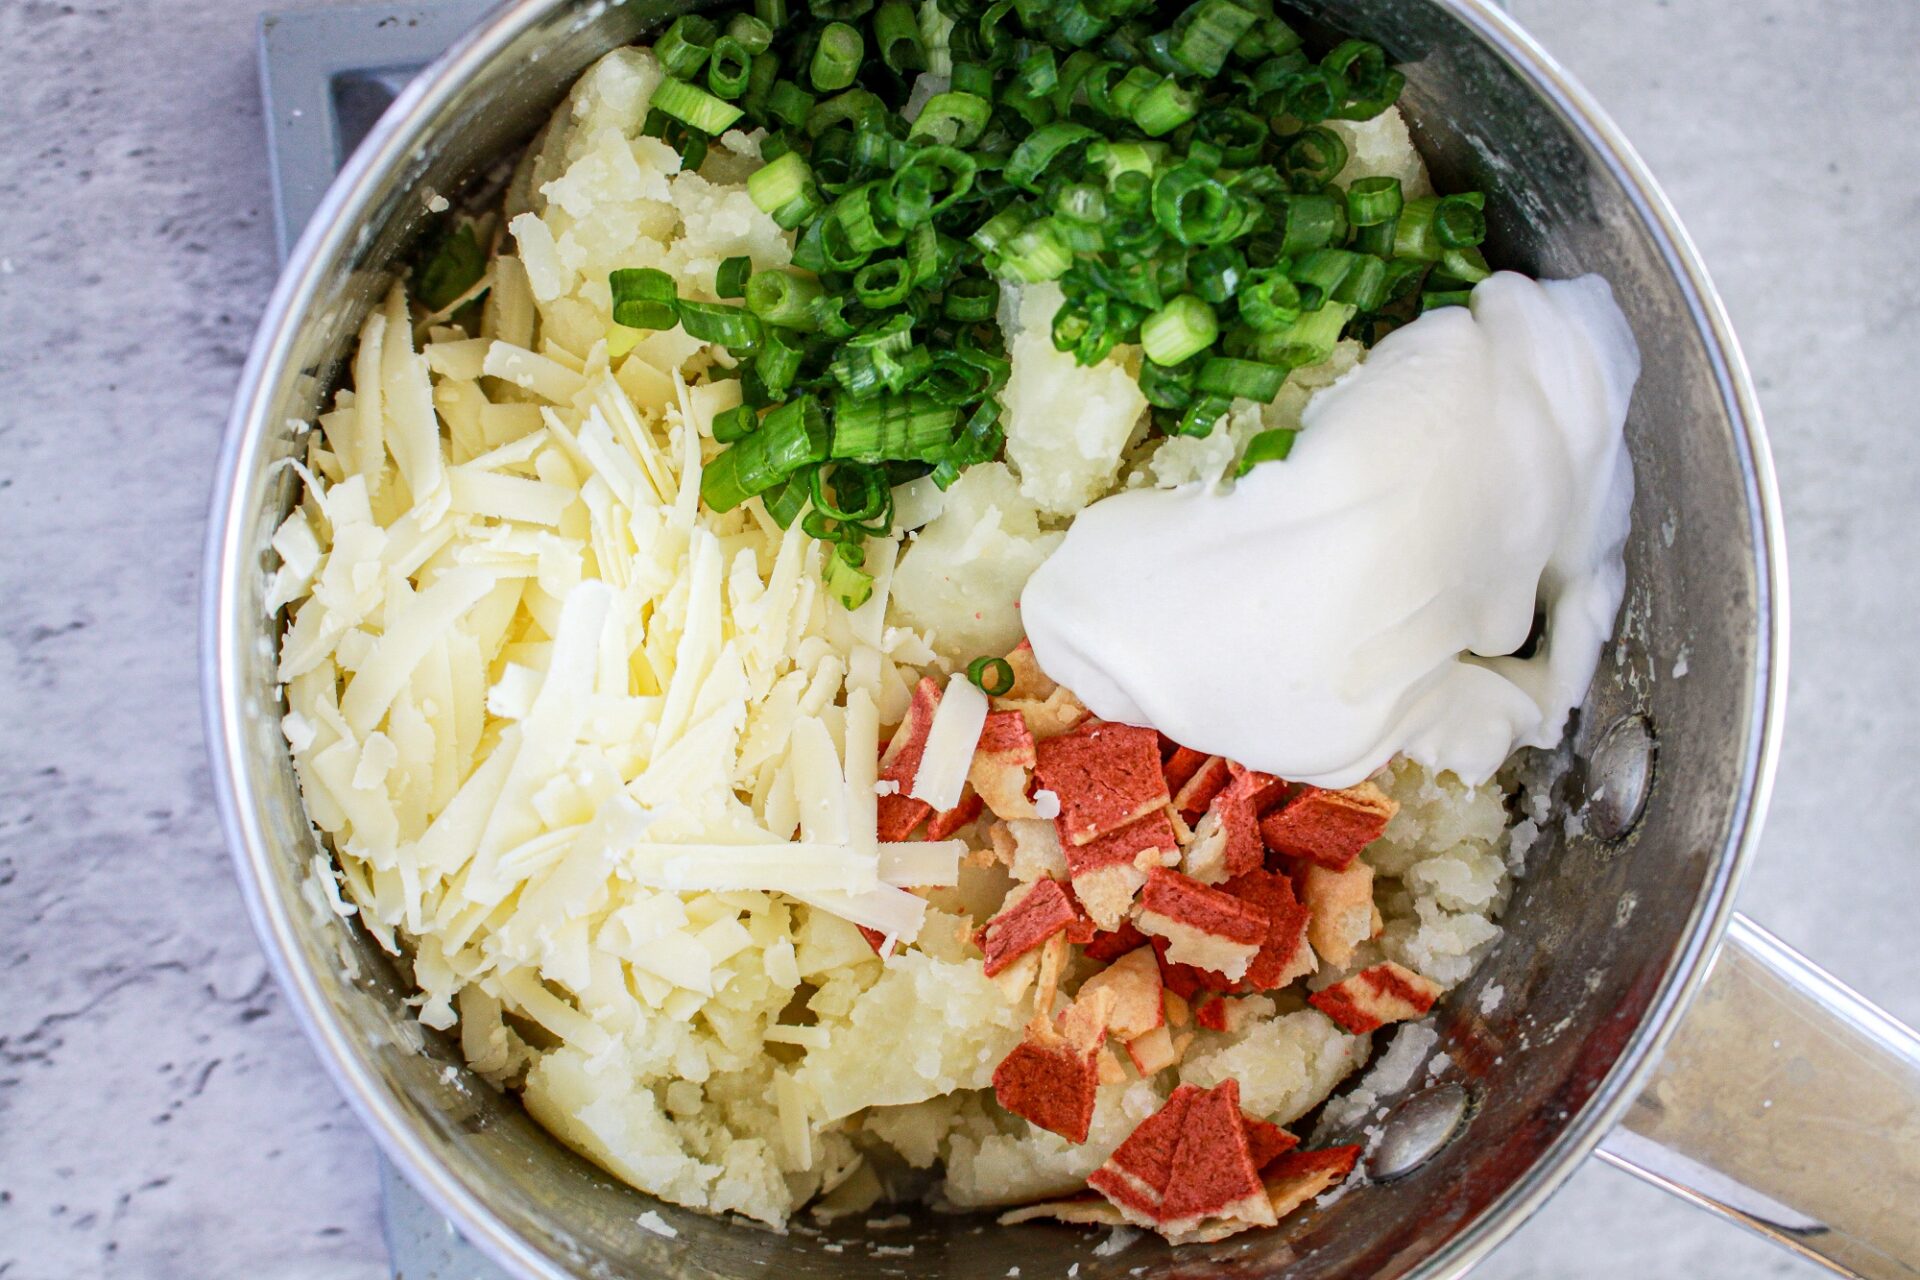 Combining ingredients for baked potato appetizers in a mixing bowl.